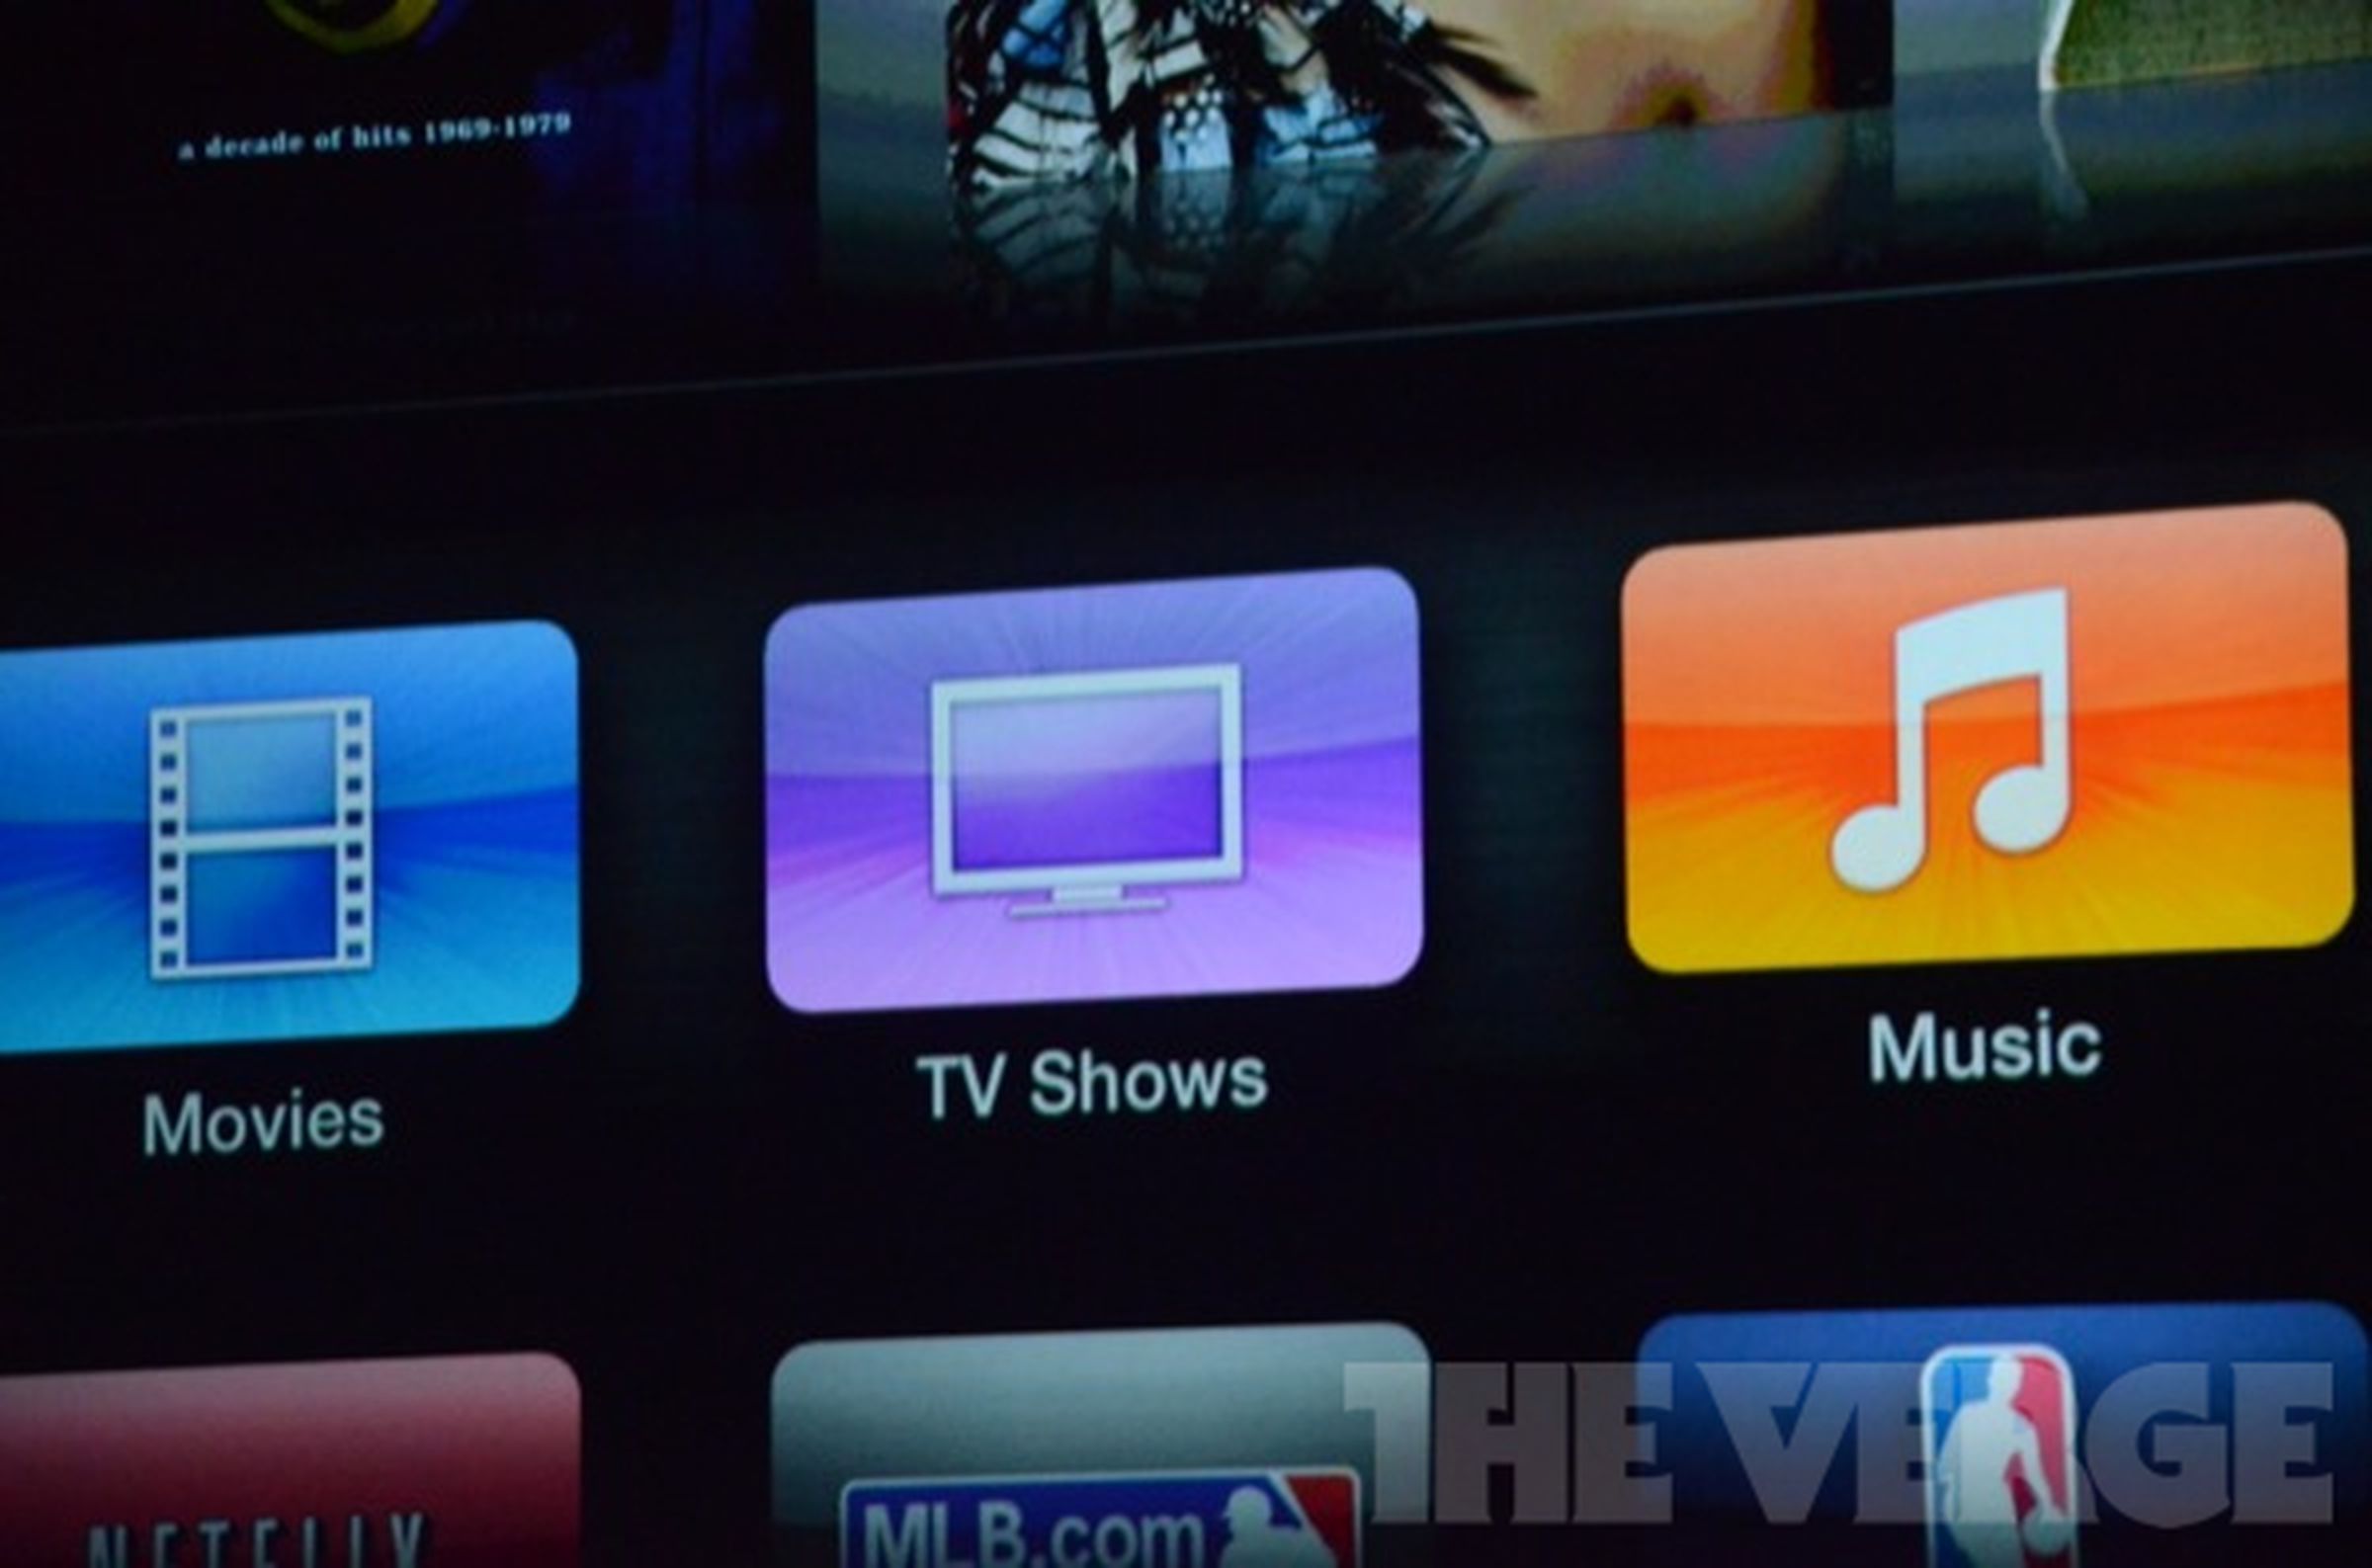 New Apple TV interface pictures